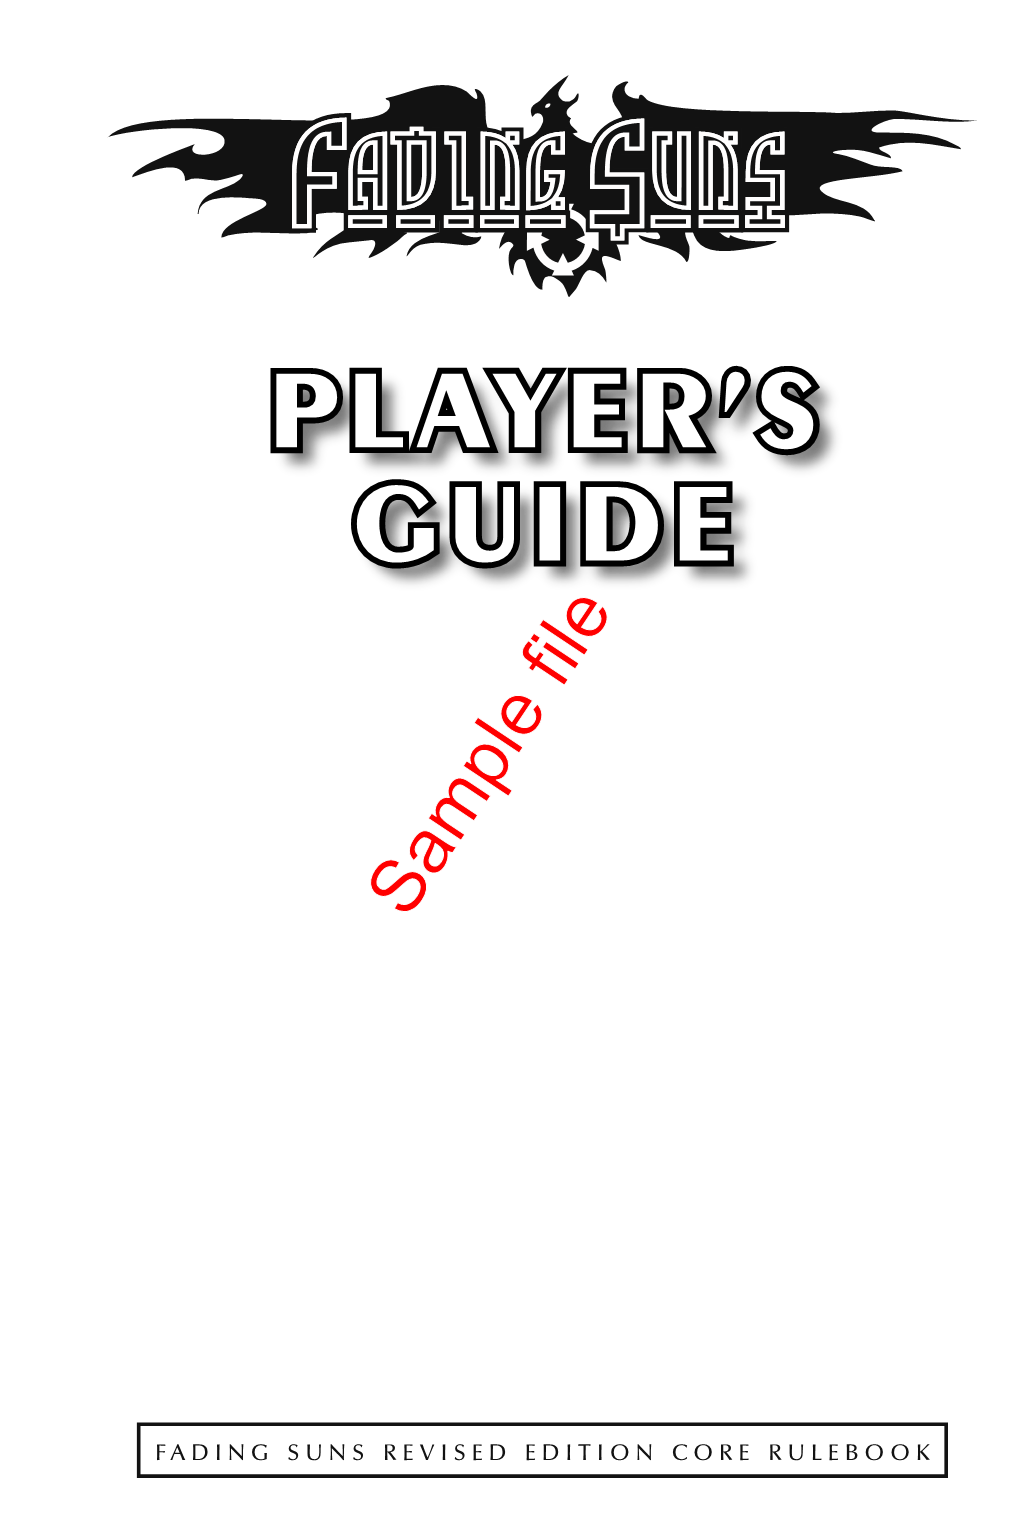 FAS21001 Fading Suns Player's Guide